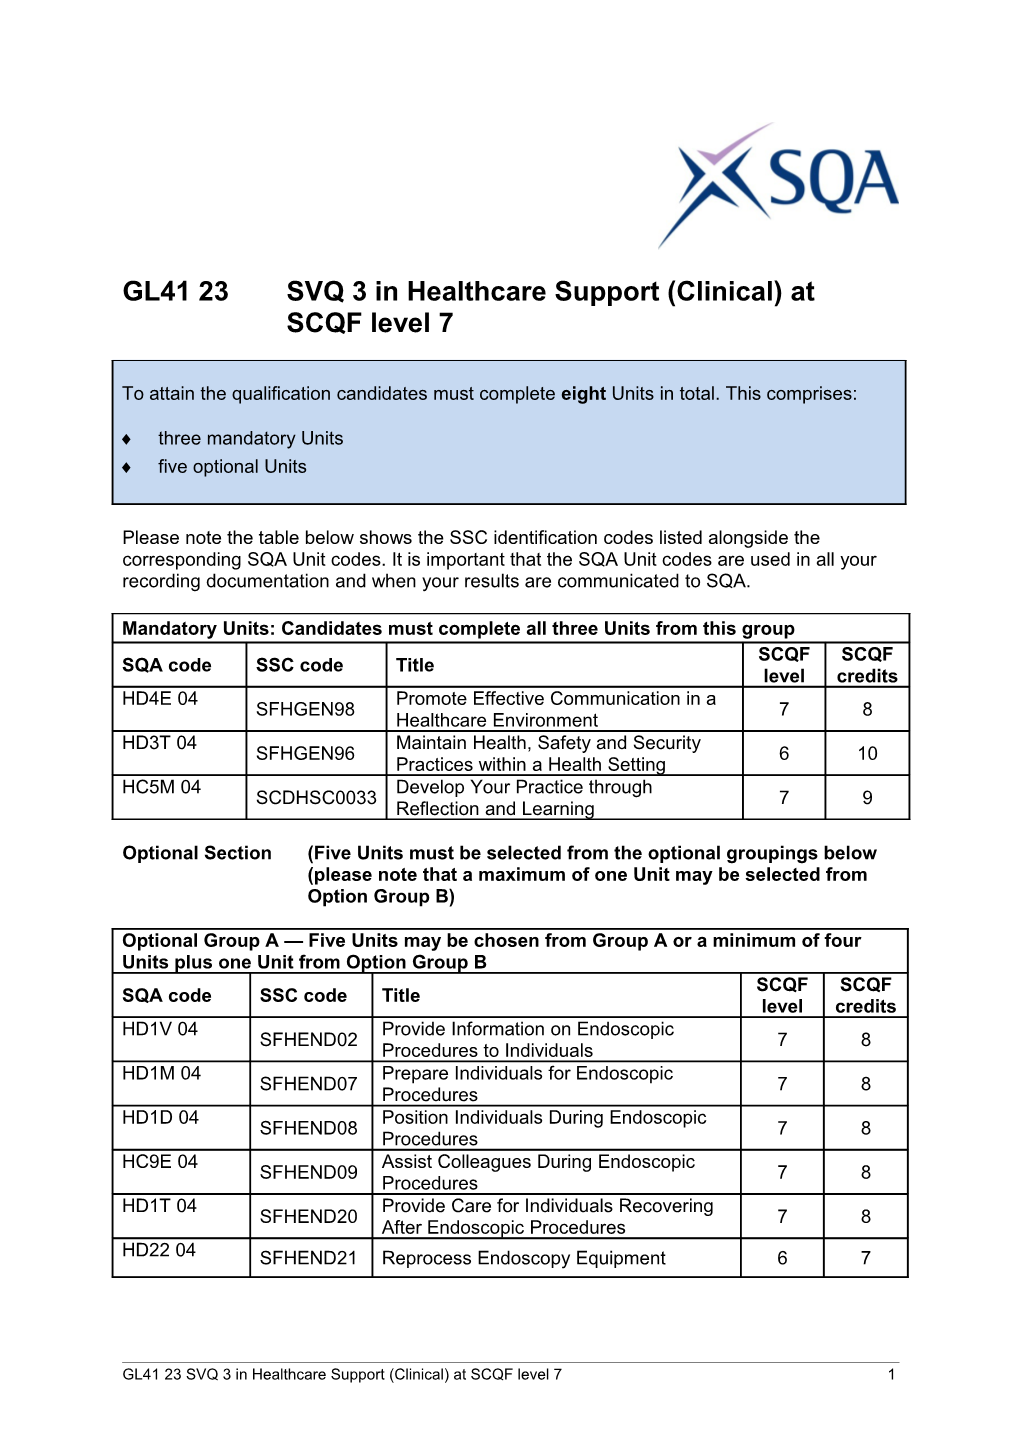 GL41 23SVQ 3 in Healthcare Support (Clinical) at SCQF Level 71